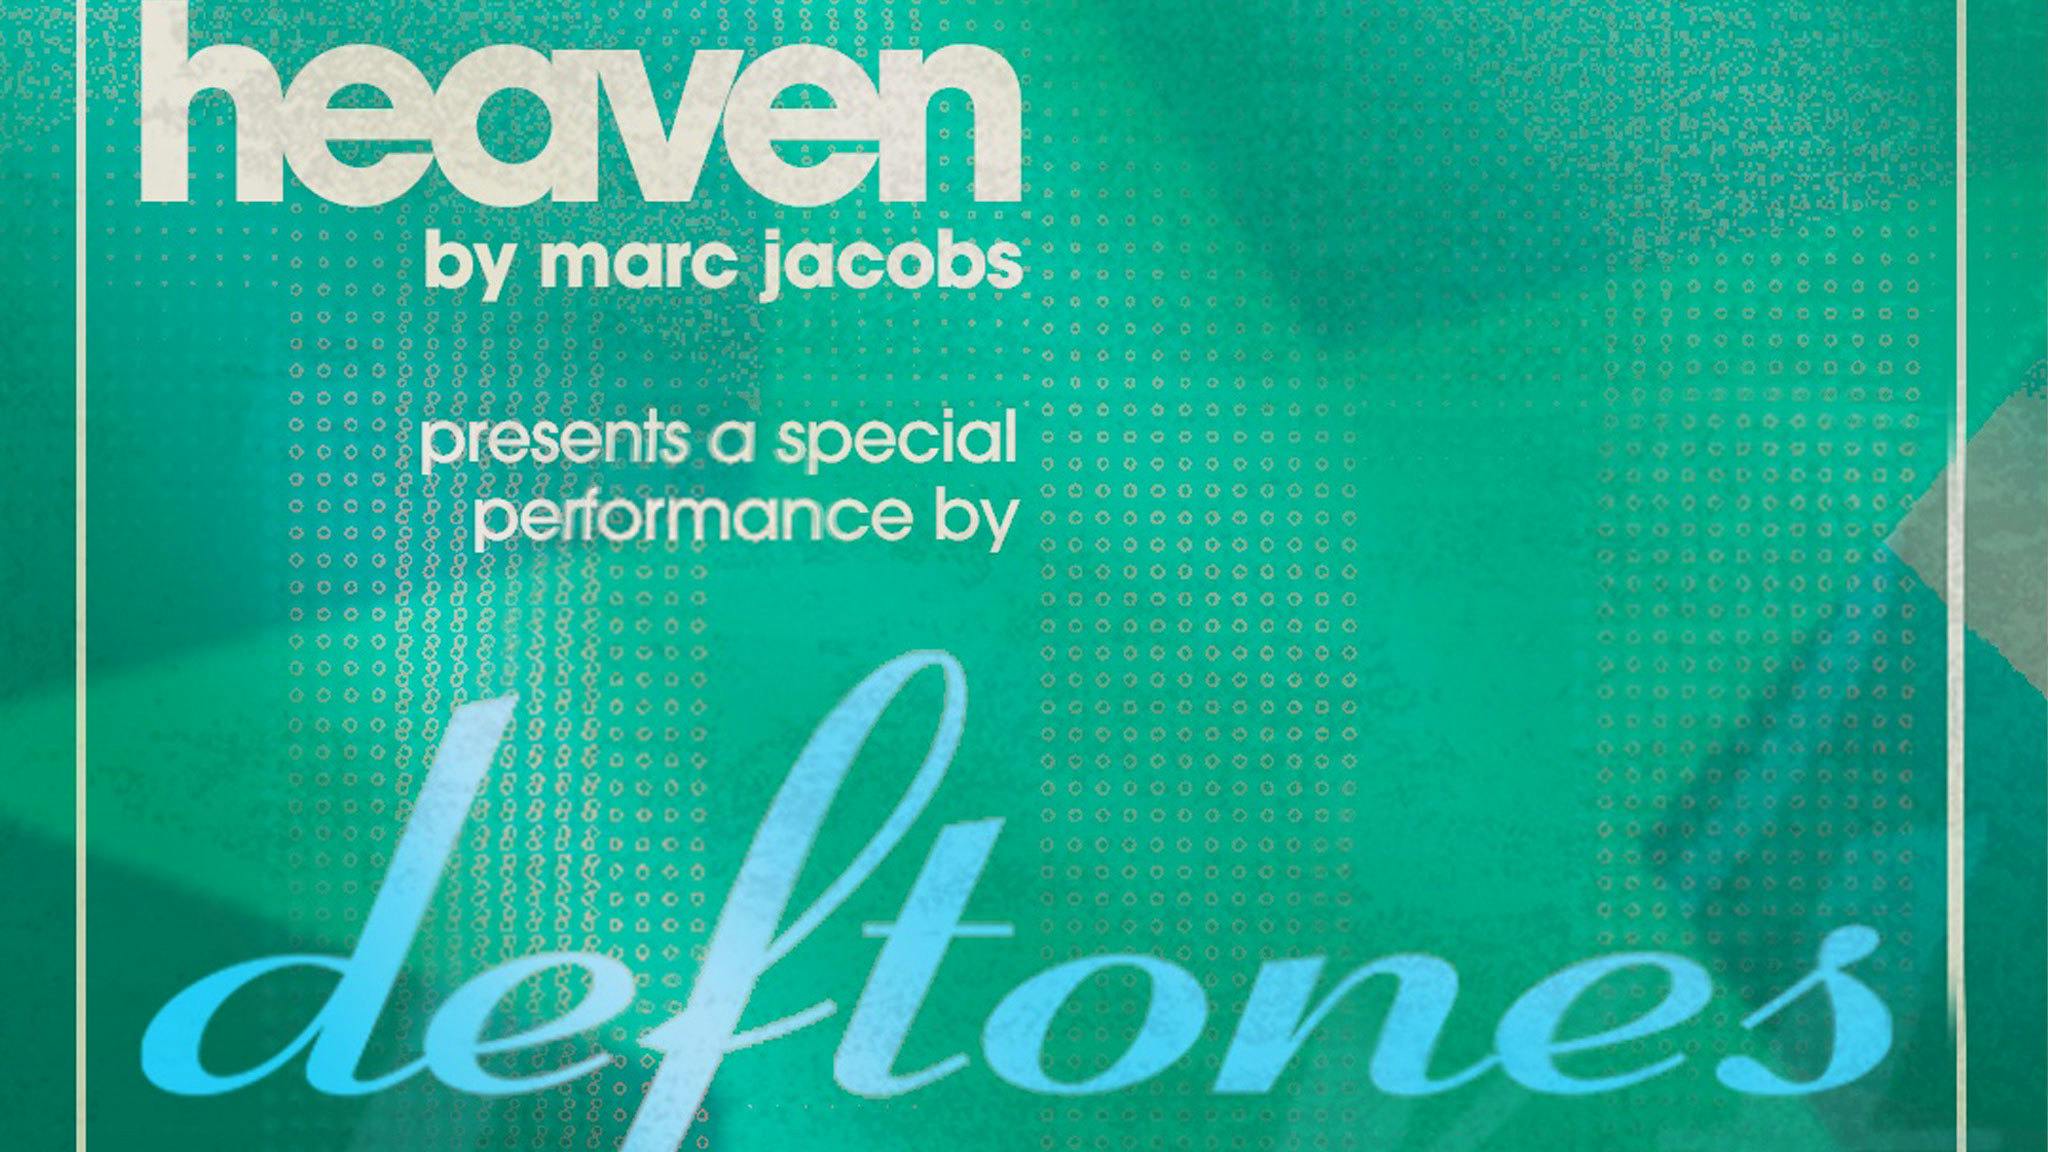 Deftones to play free Marc Jacobs show in New York tonight